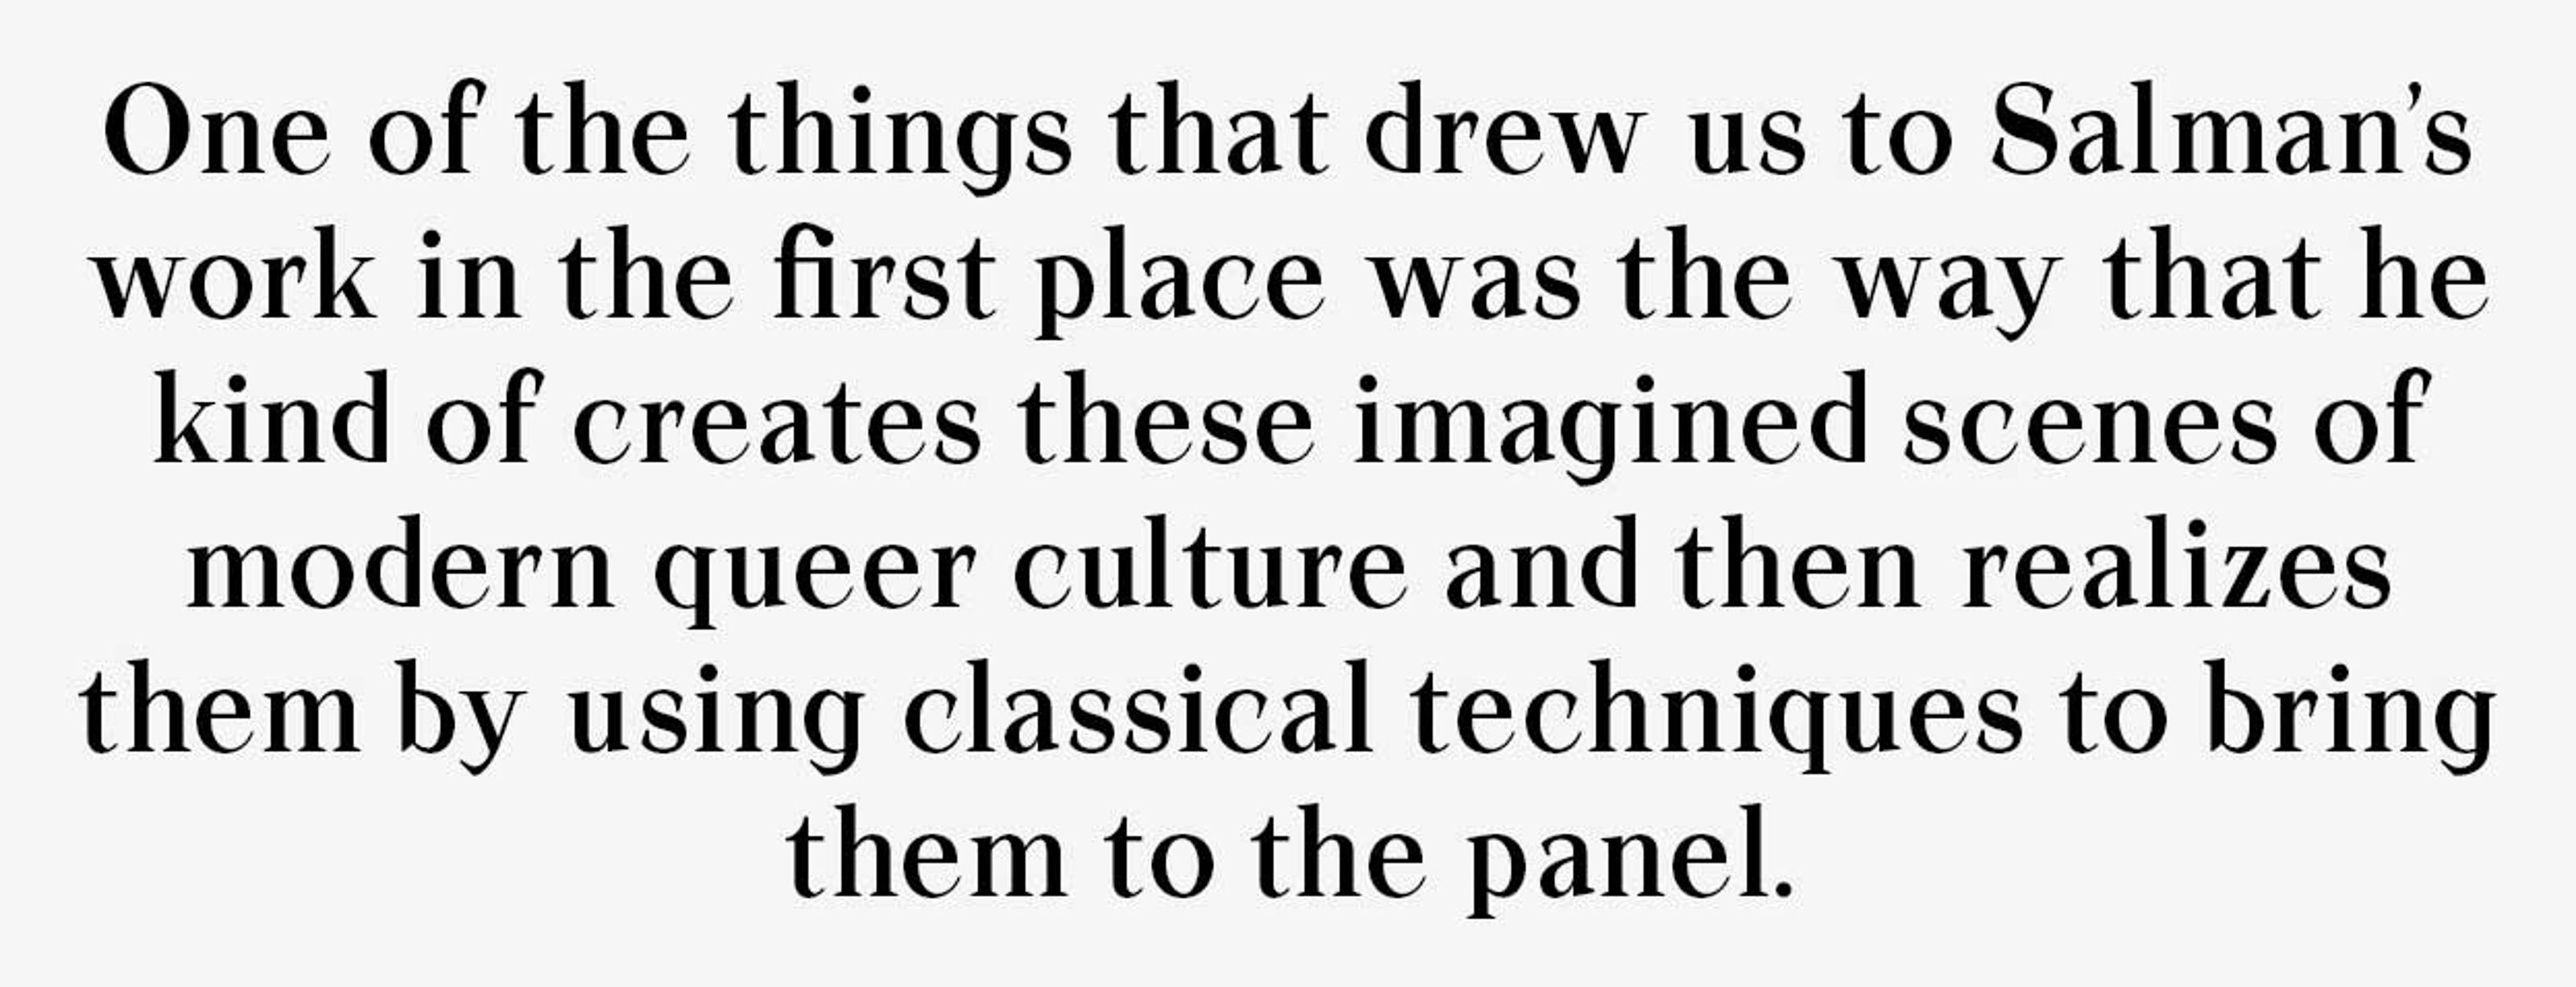 One of the things that drew us to Salman’s work in the first place was they way that he kind of creates these imagined scenes of modern queer culture and then realizes them by using classical techniques to bring them to the panel.